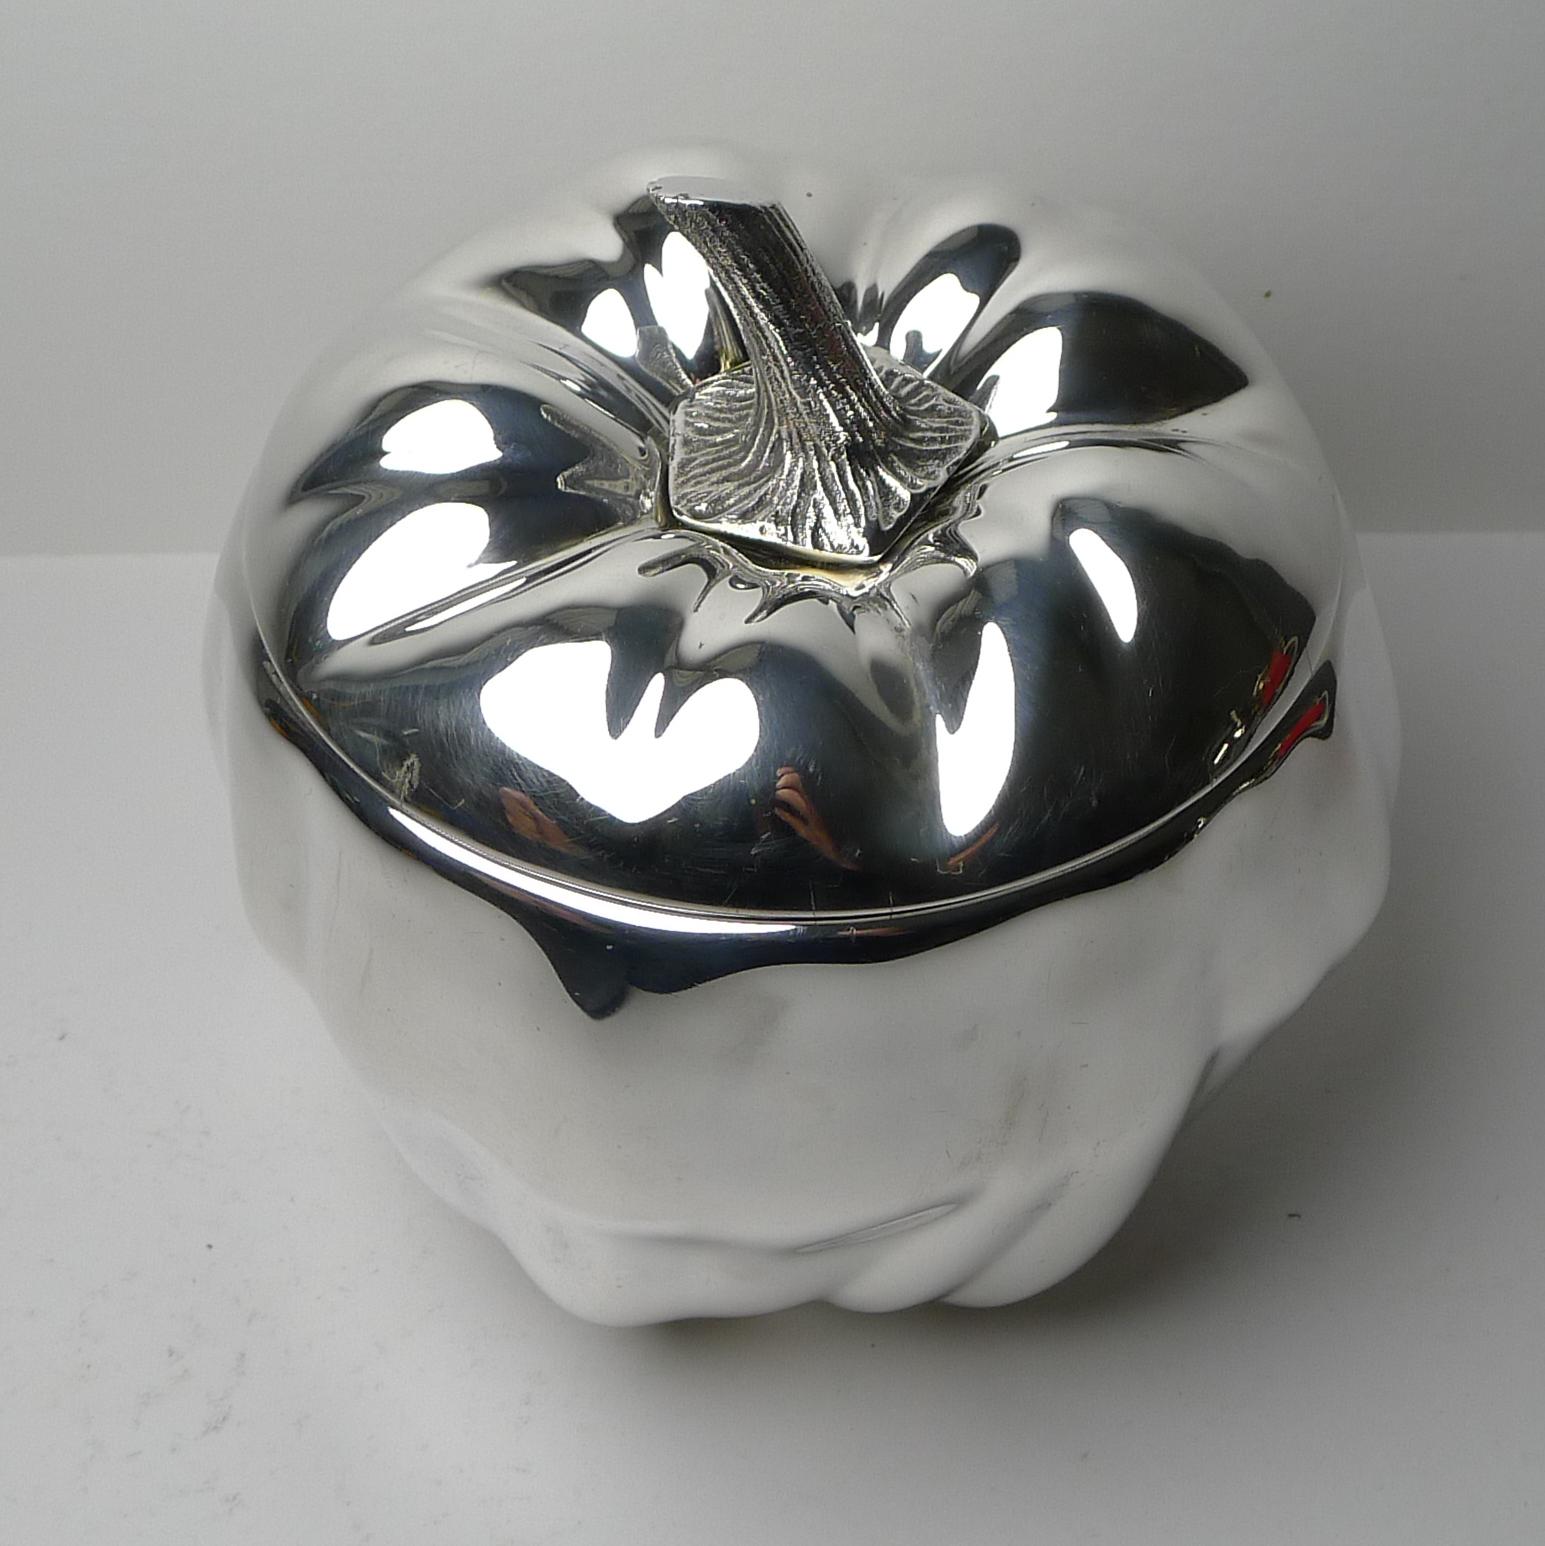 Vintage Silver Plated Pumpkin Ice Bucket by Teghini, Firenze, Italy c.1970 In Good Condition For Sale In Bath, GB